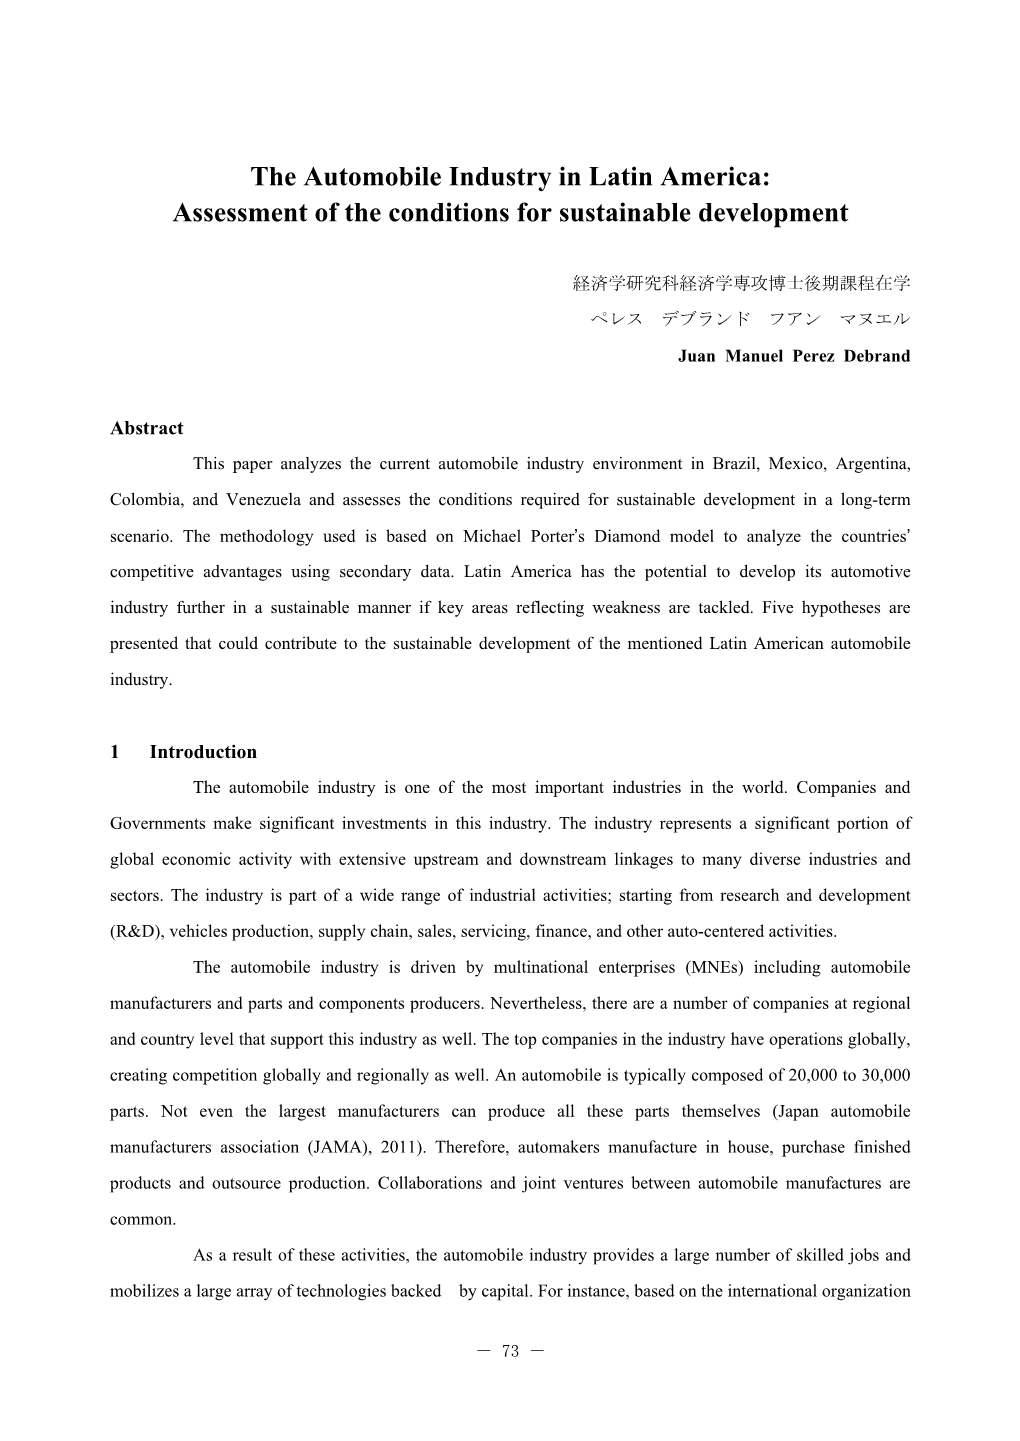 The Automobile Industry in Latin America: Assessment of the Conditions for Sustainable Development